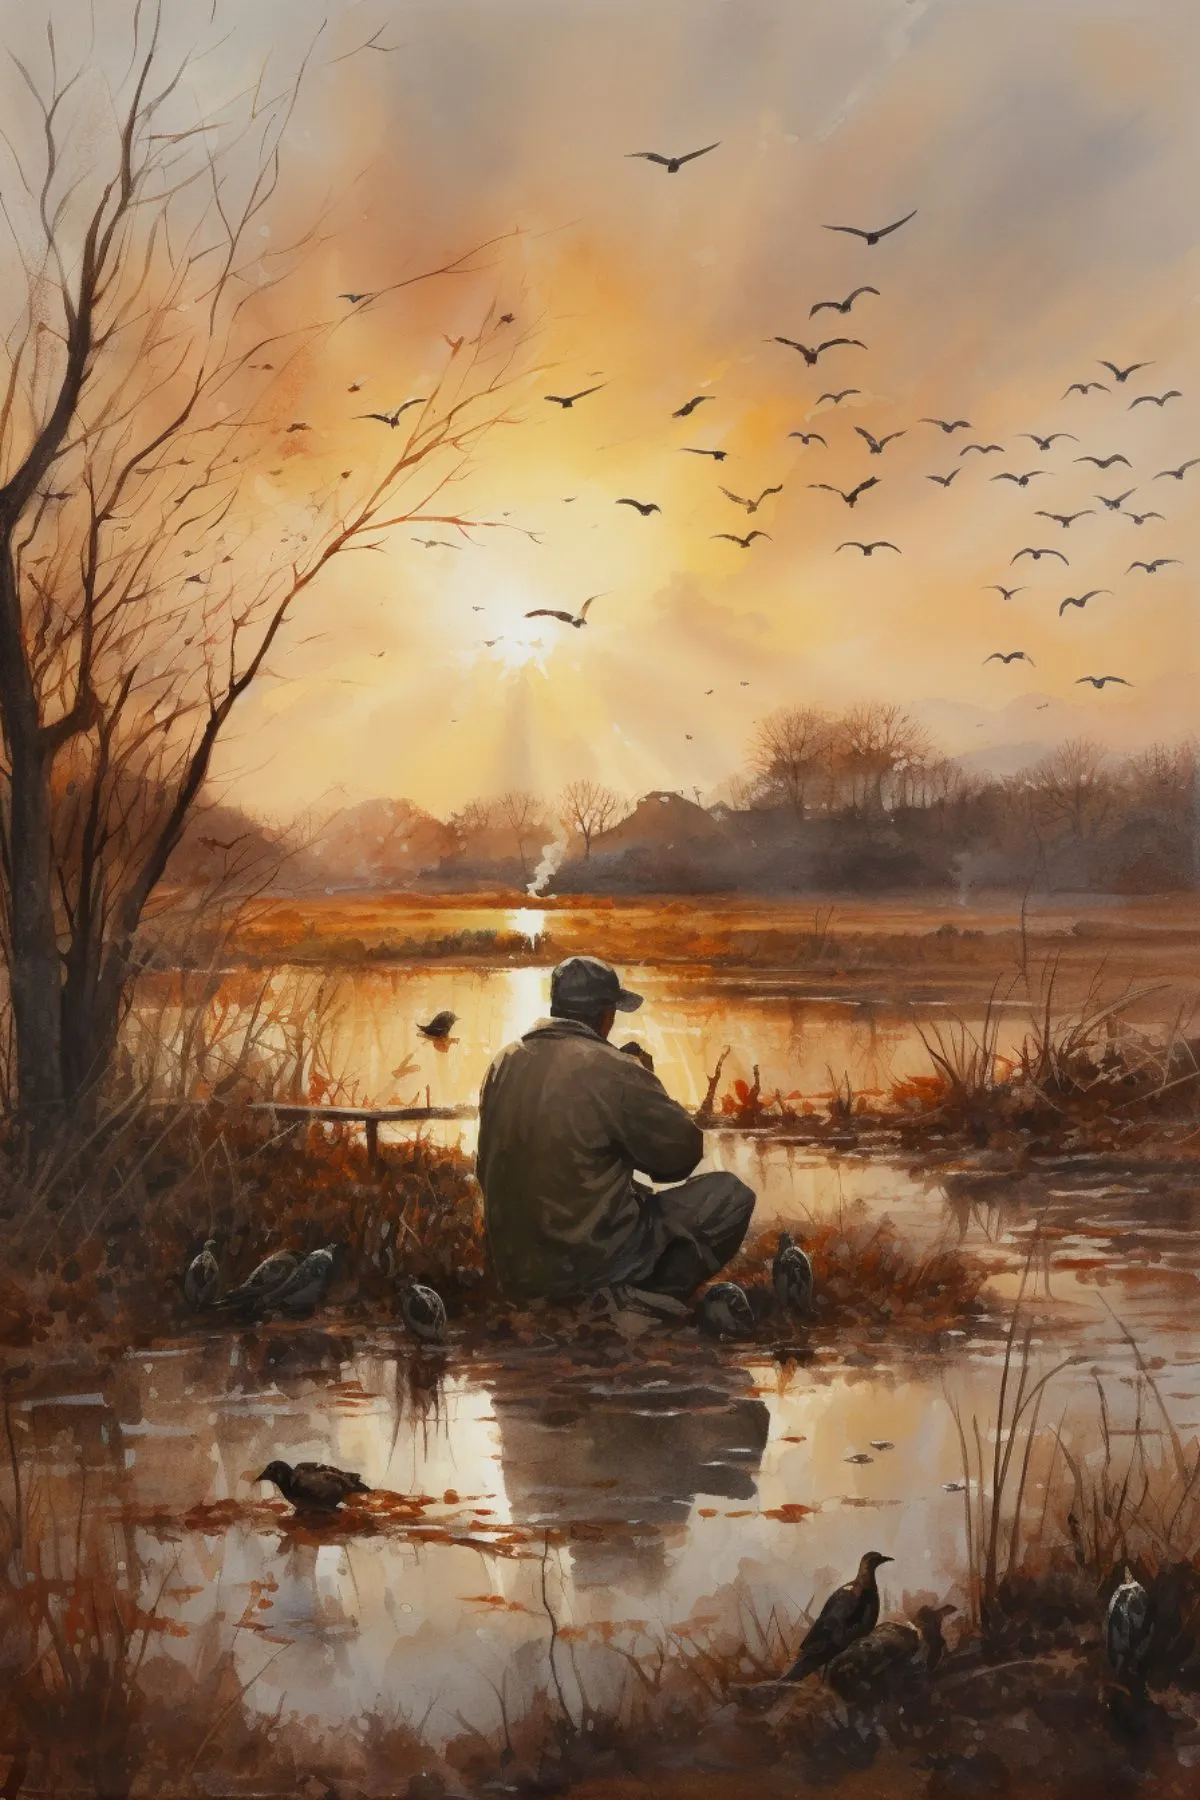 watercolor scene of someone at a pond in the morning